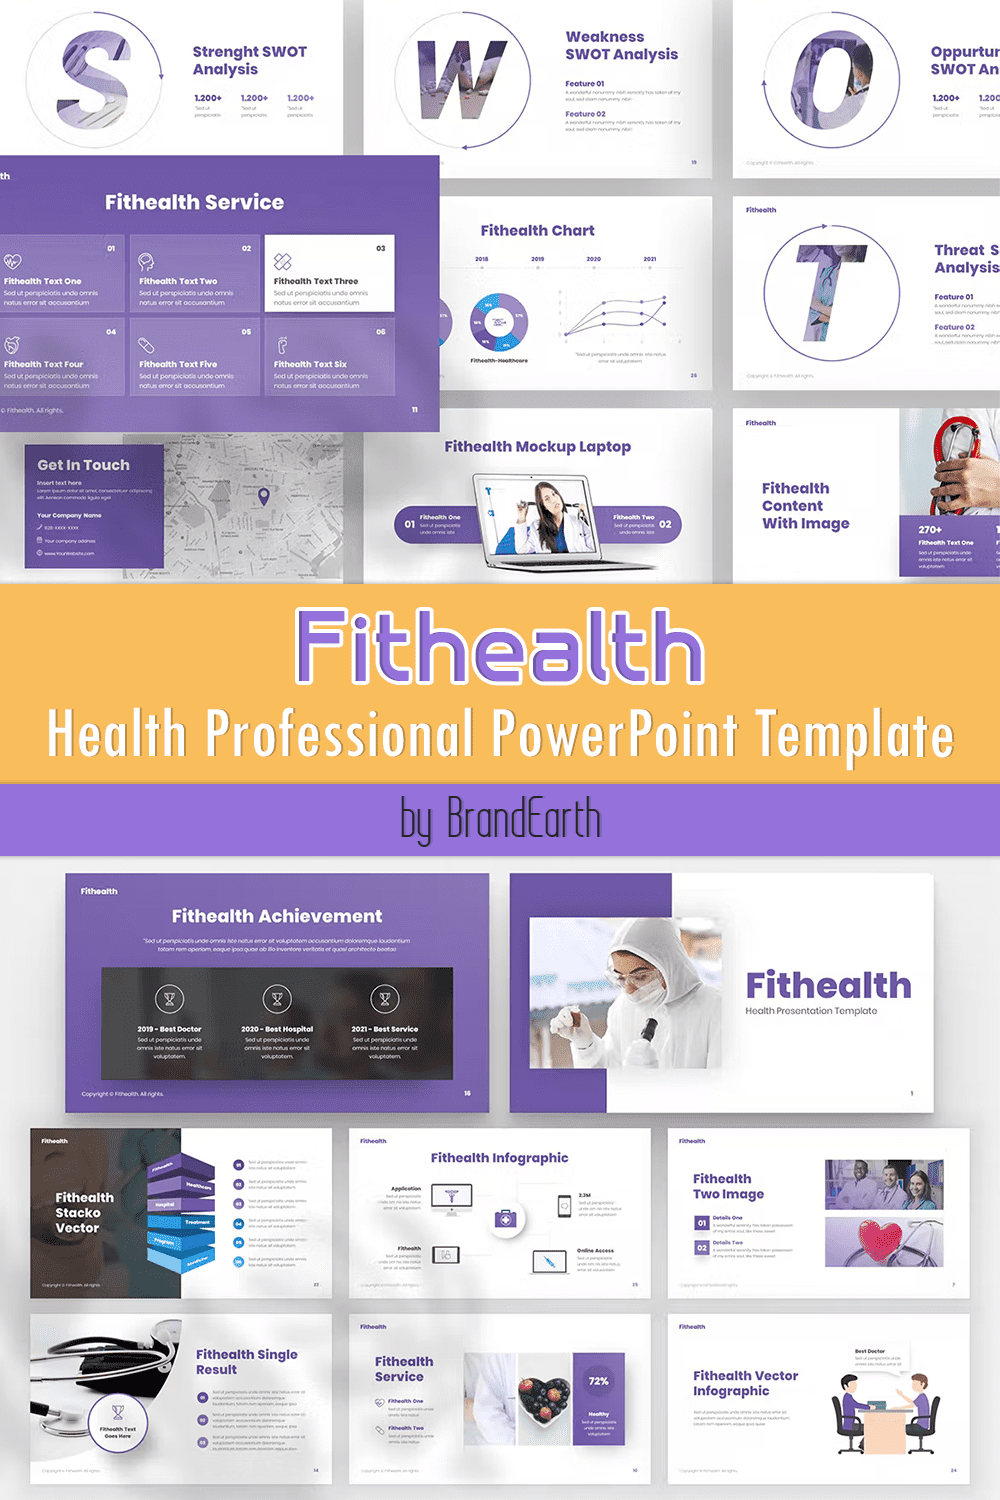 Fithealth Health Professional PowerPoint Template - Pinterest.